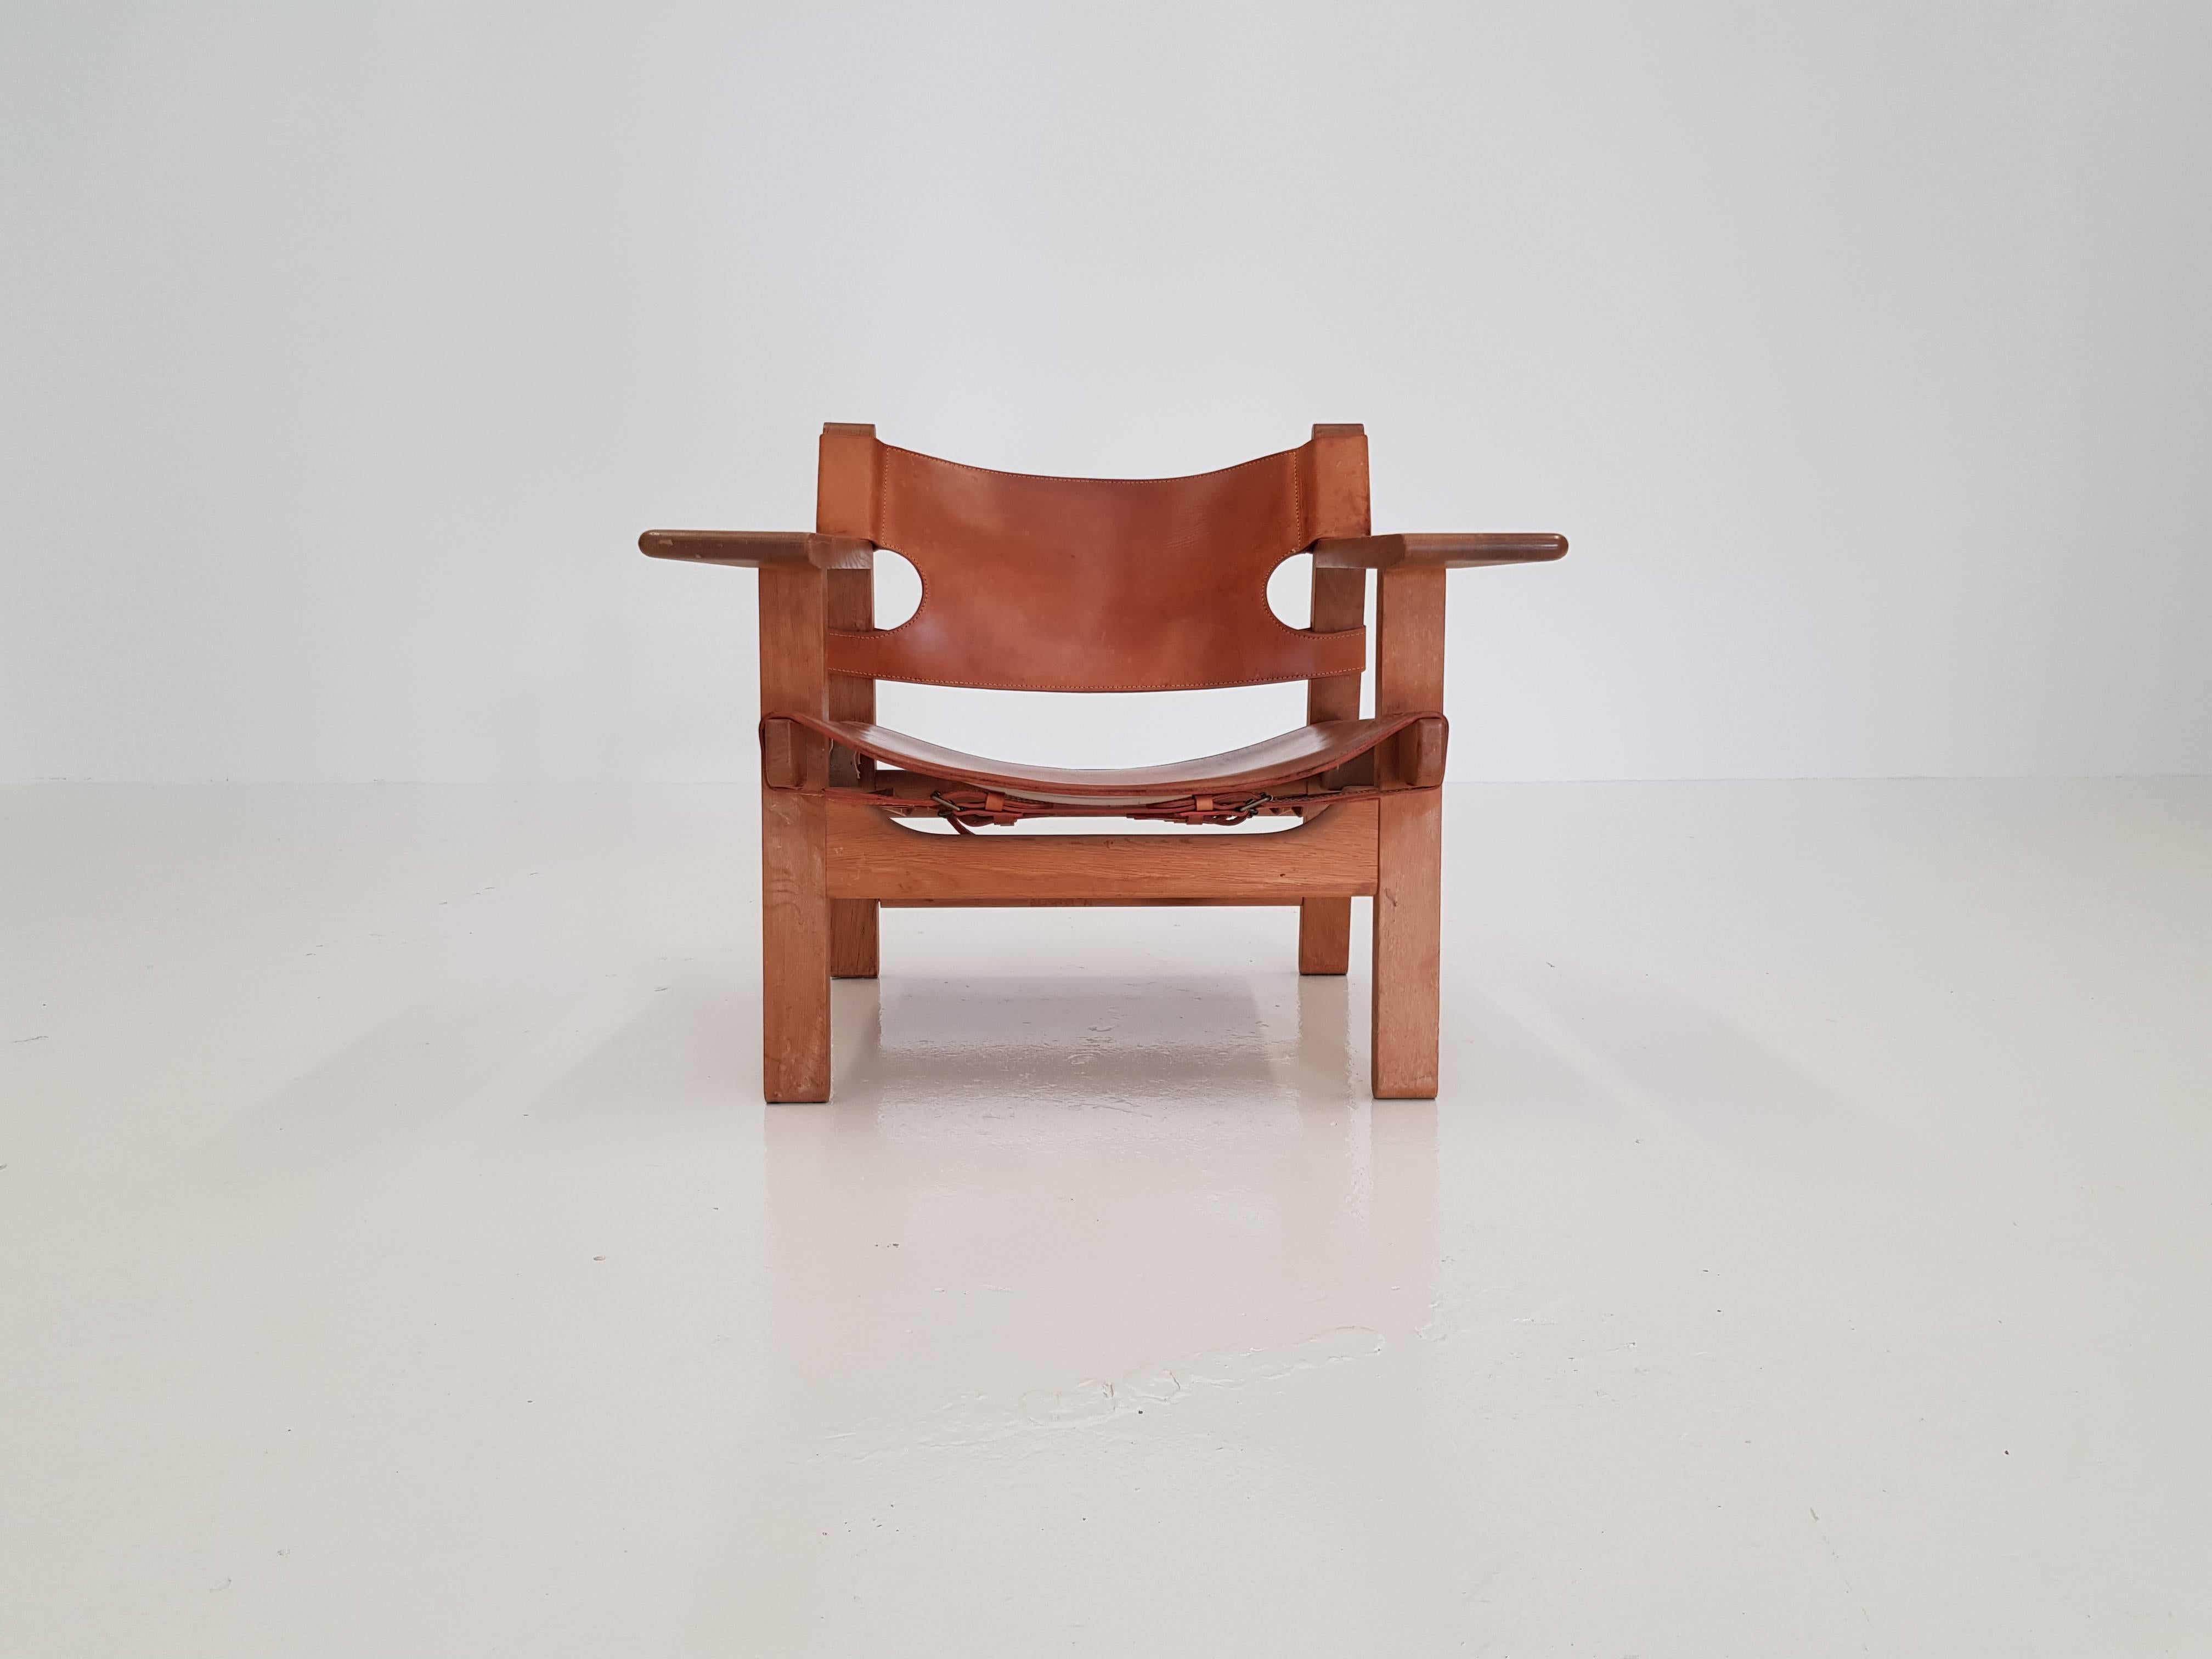 Leather Børge Mogensen Spanish Chair, Designed 1958, Produced by Fredericia Stolefabrik